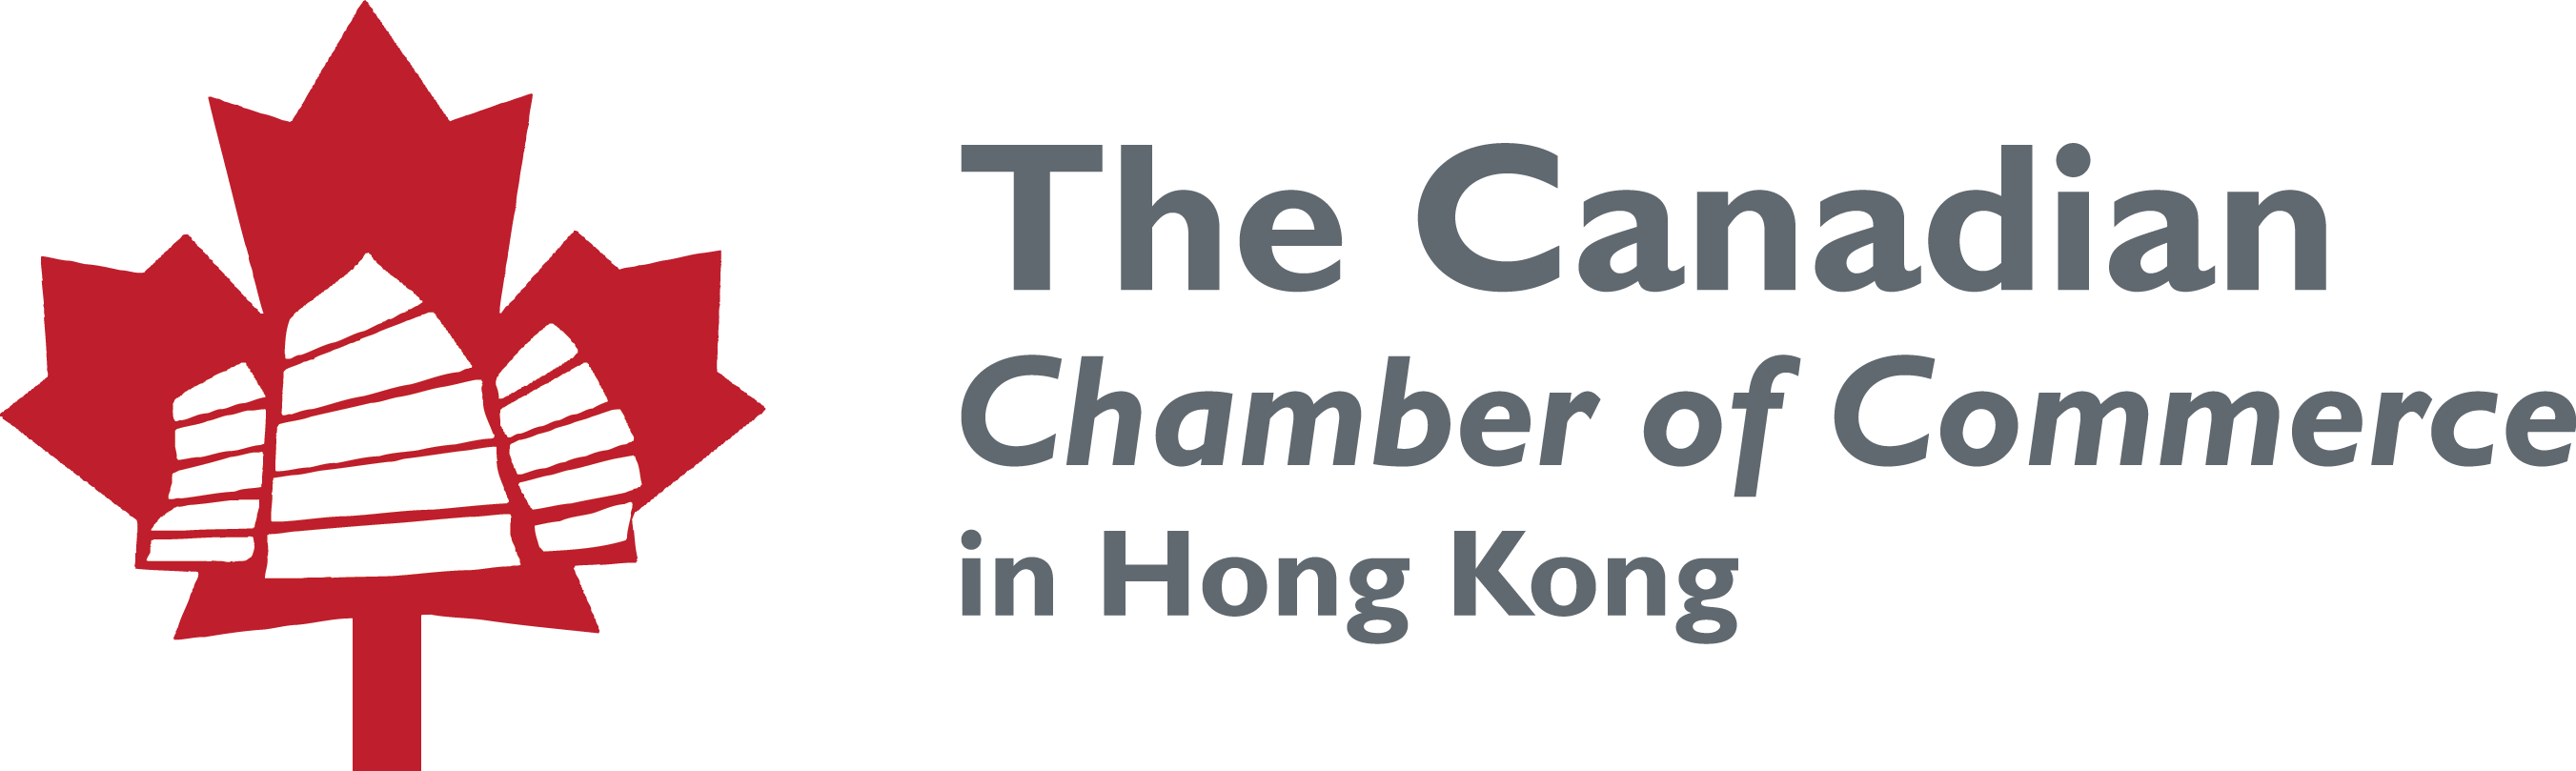 Supporting organization. Hamburg Chamber of Commerce. Canadian Chamber of Commerce logo PNG. Union of Chambers of Commerce of Turkey. Thai Chamber of Commerce University rating.